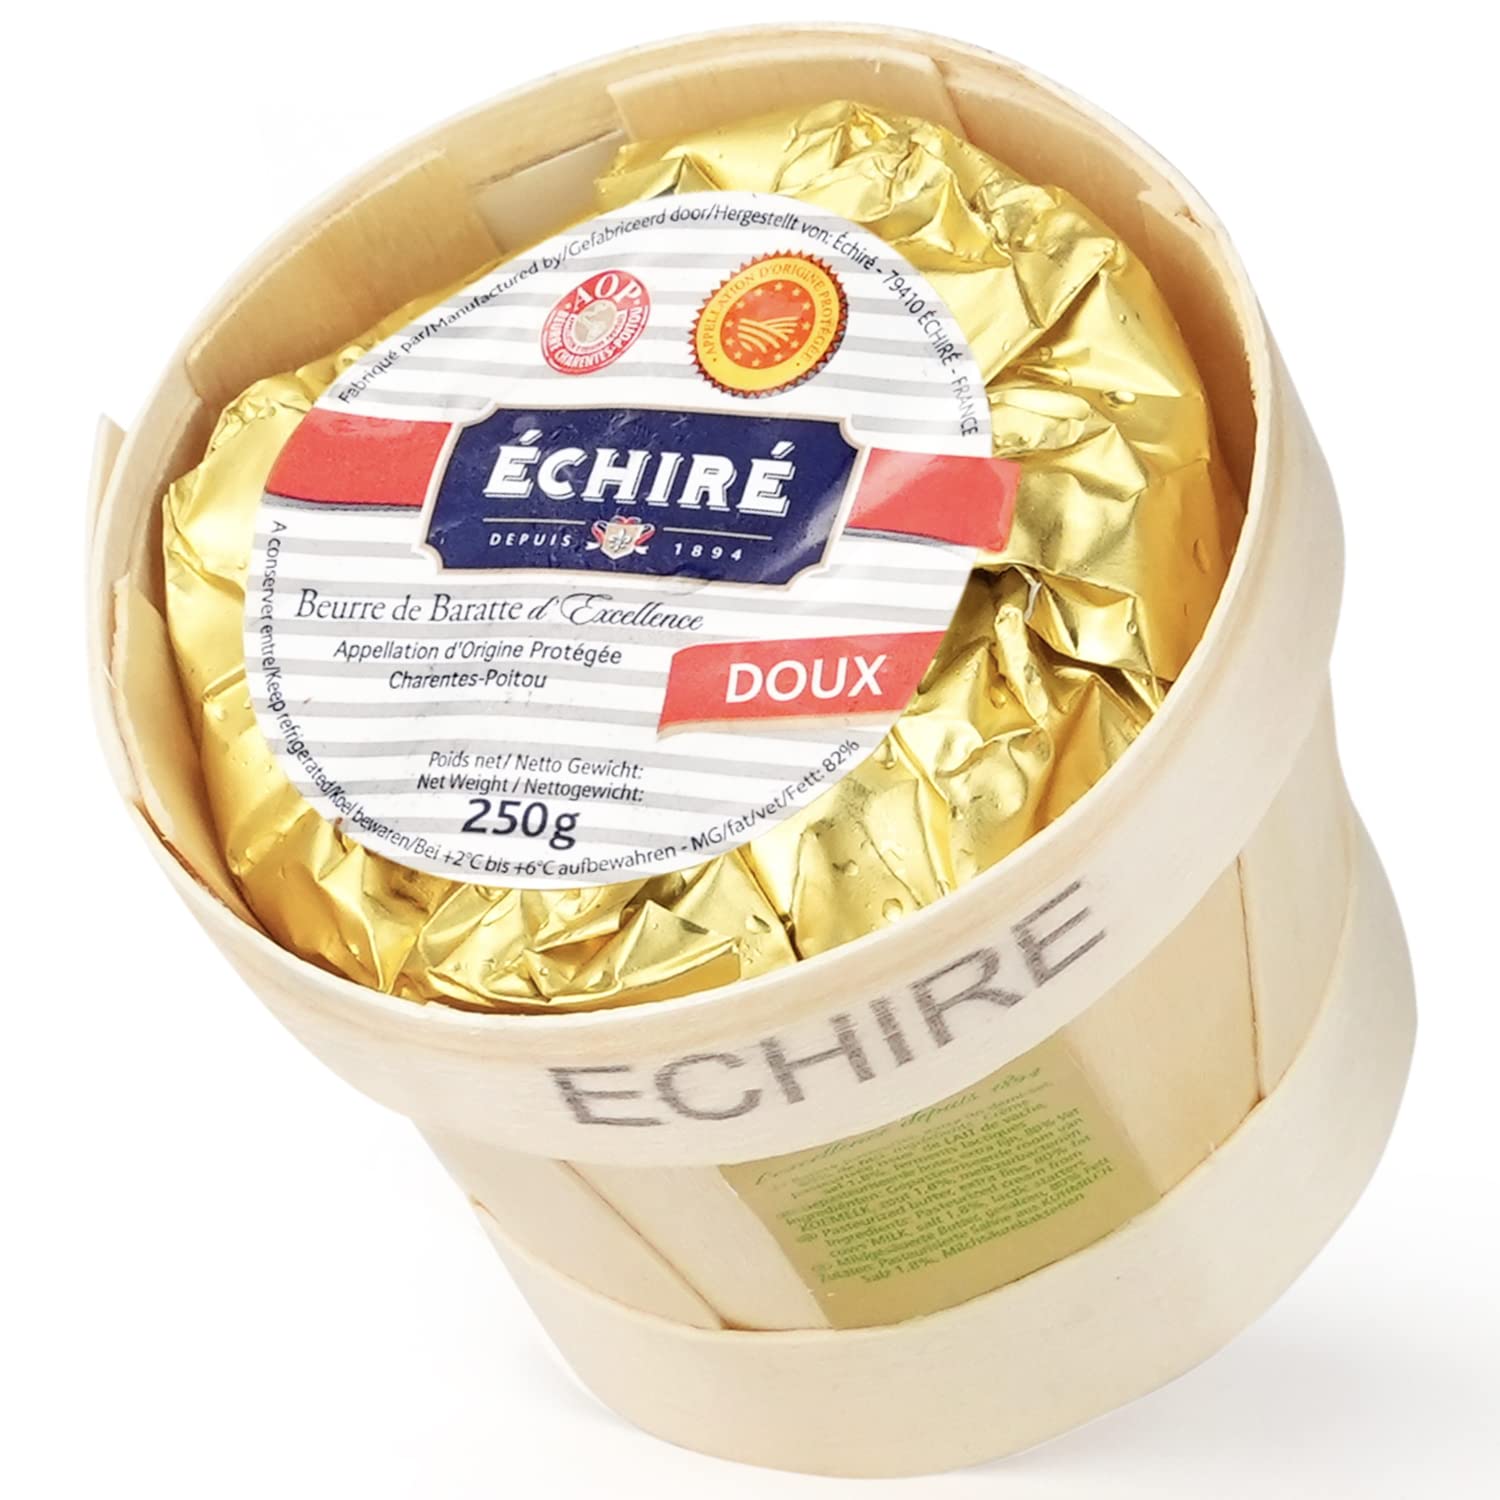 Depuis Echire French Unsalted Butter Basket 5kg 1ct